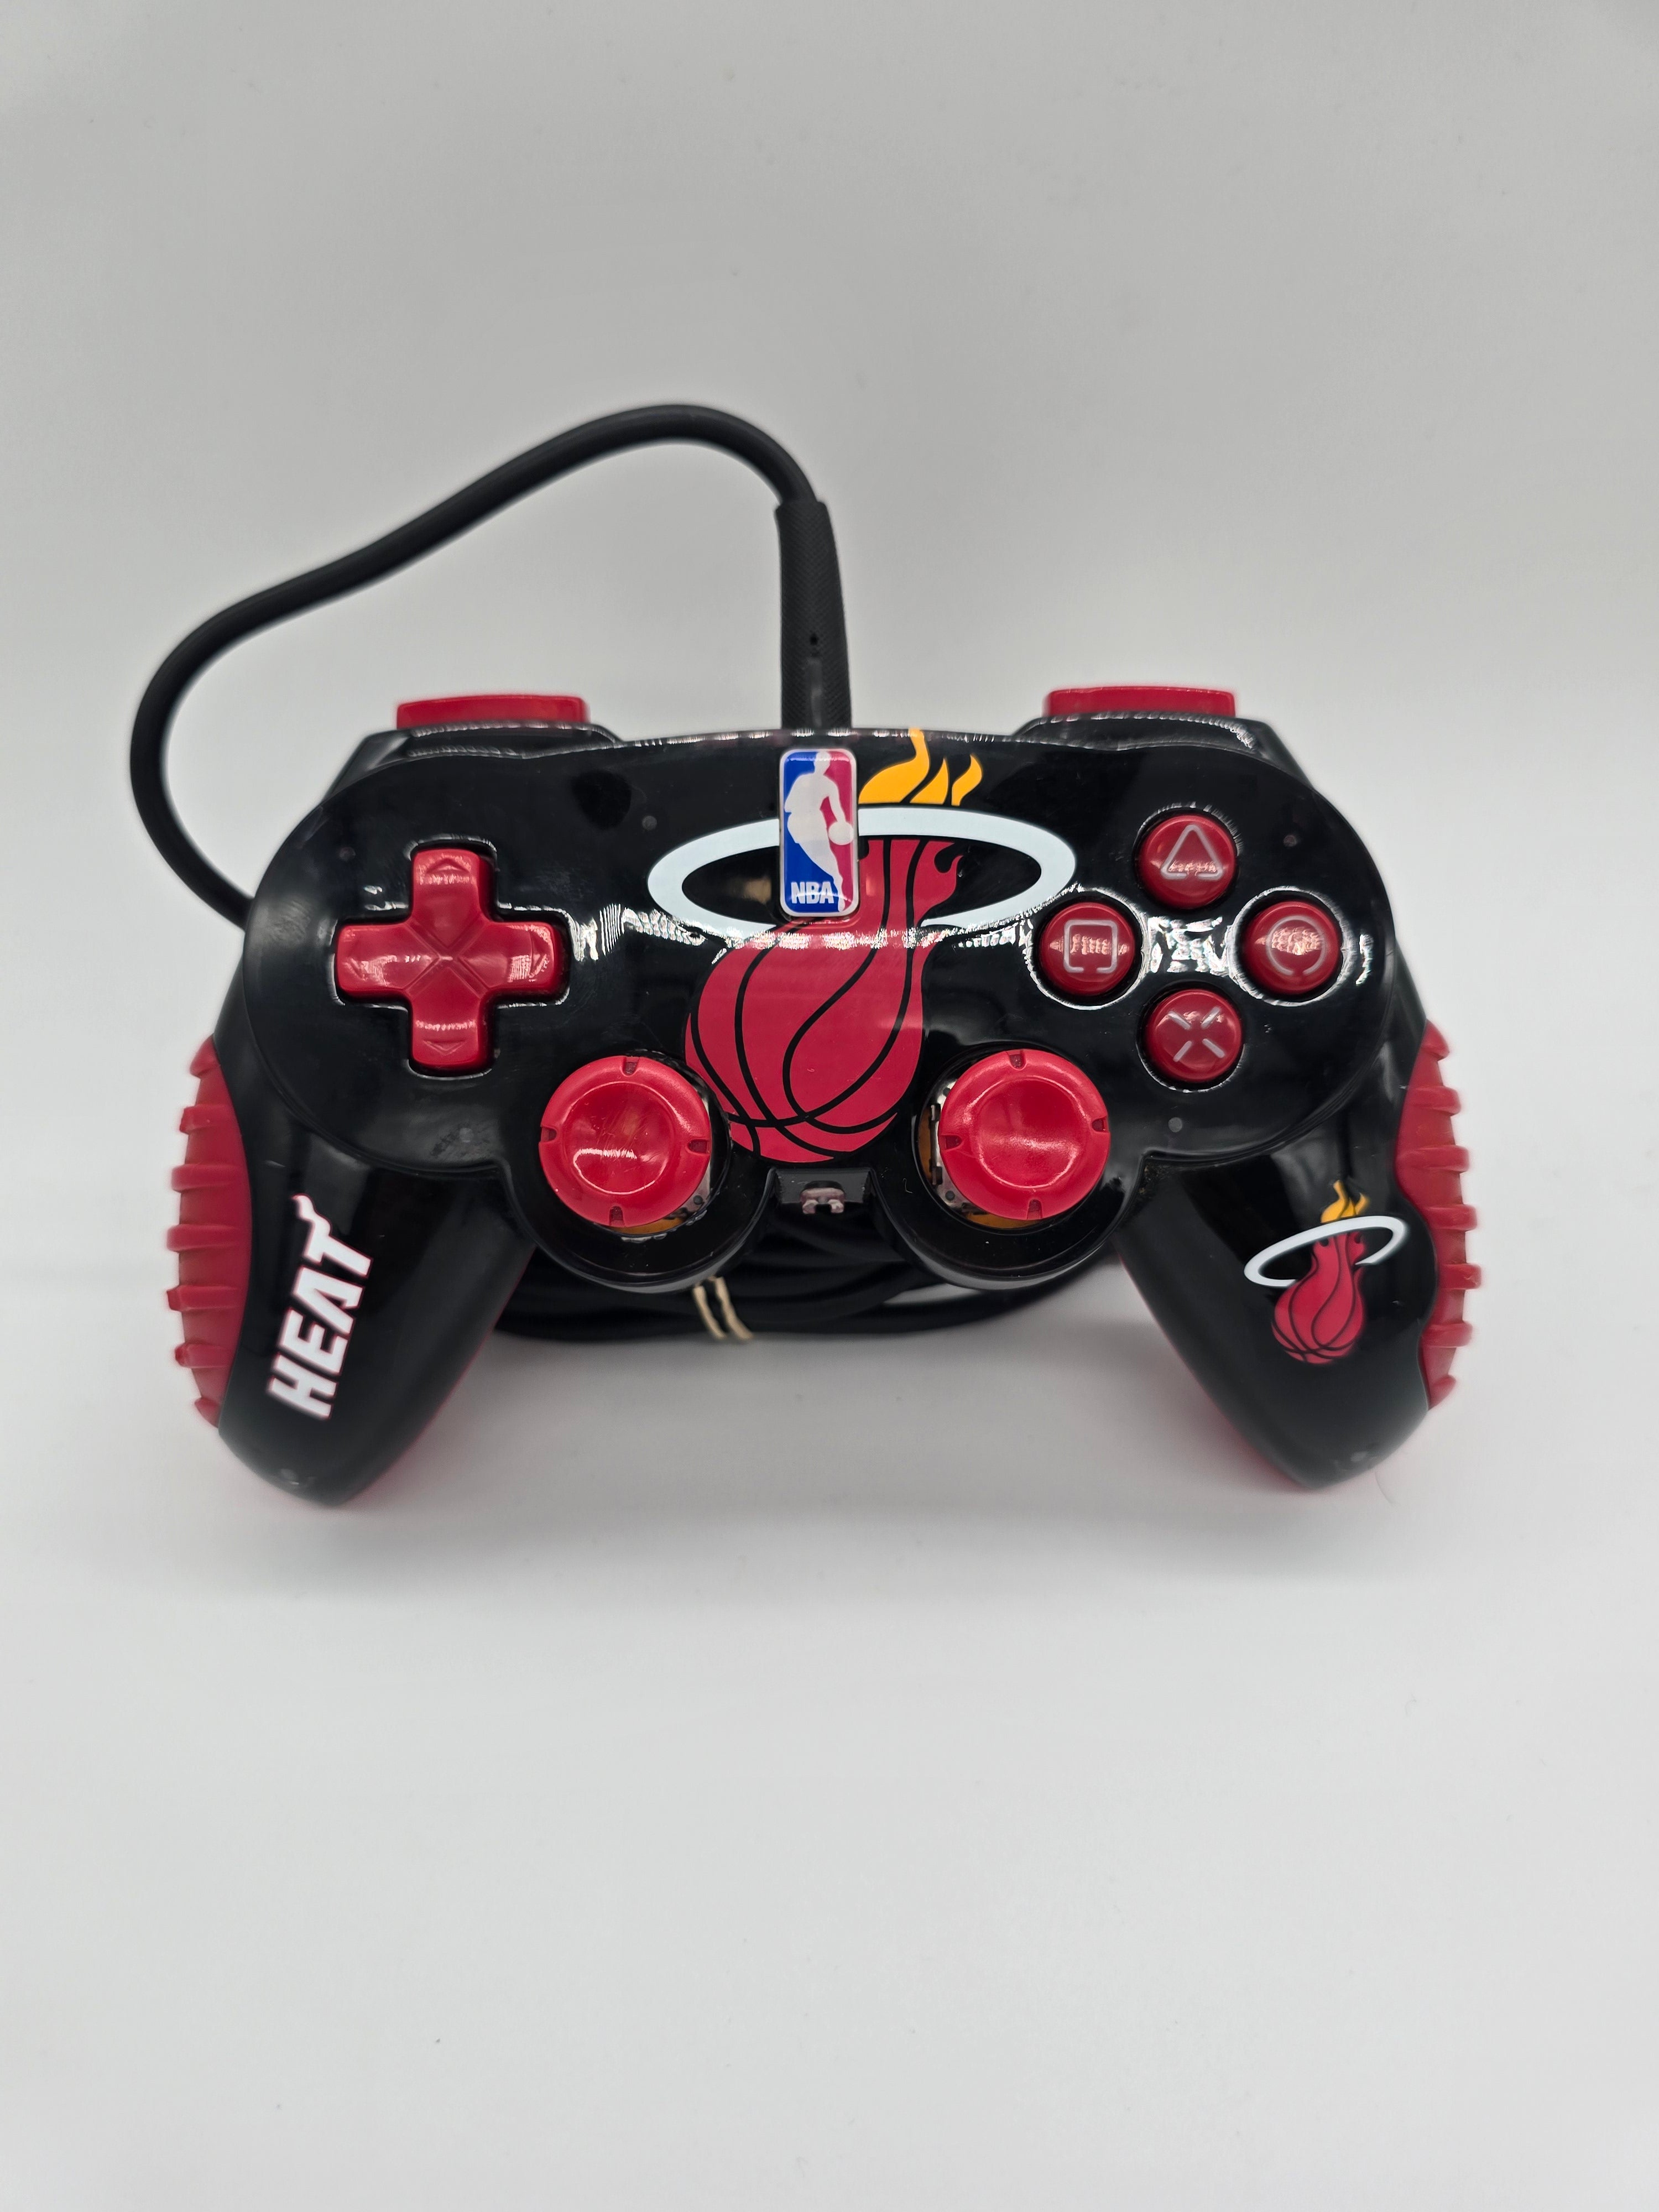 Miami Heat NBA Basketball Wired Controller - Madcatz Control Pad Pro PS1 or PS2